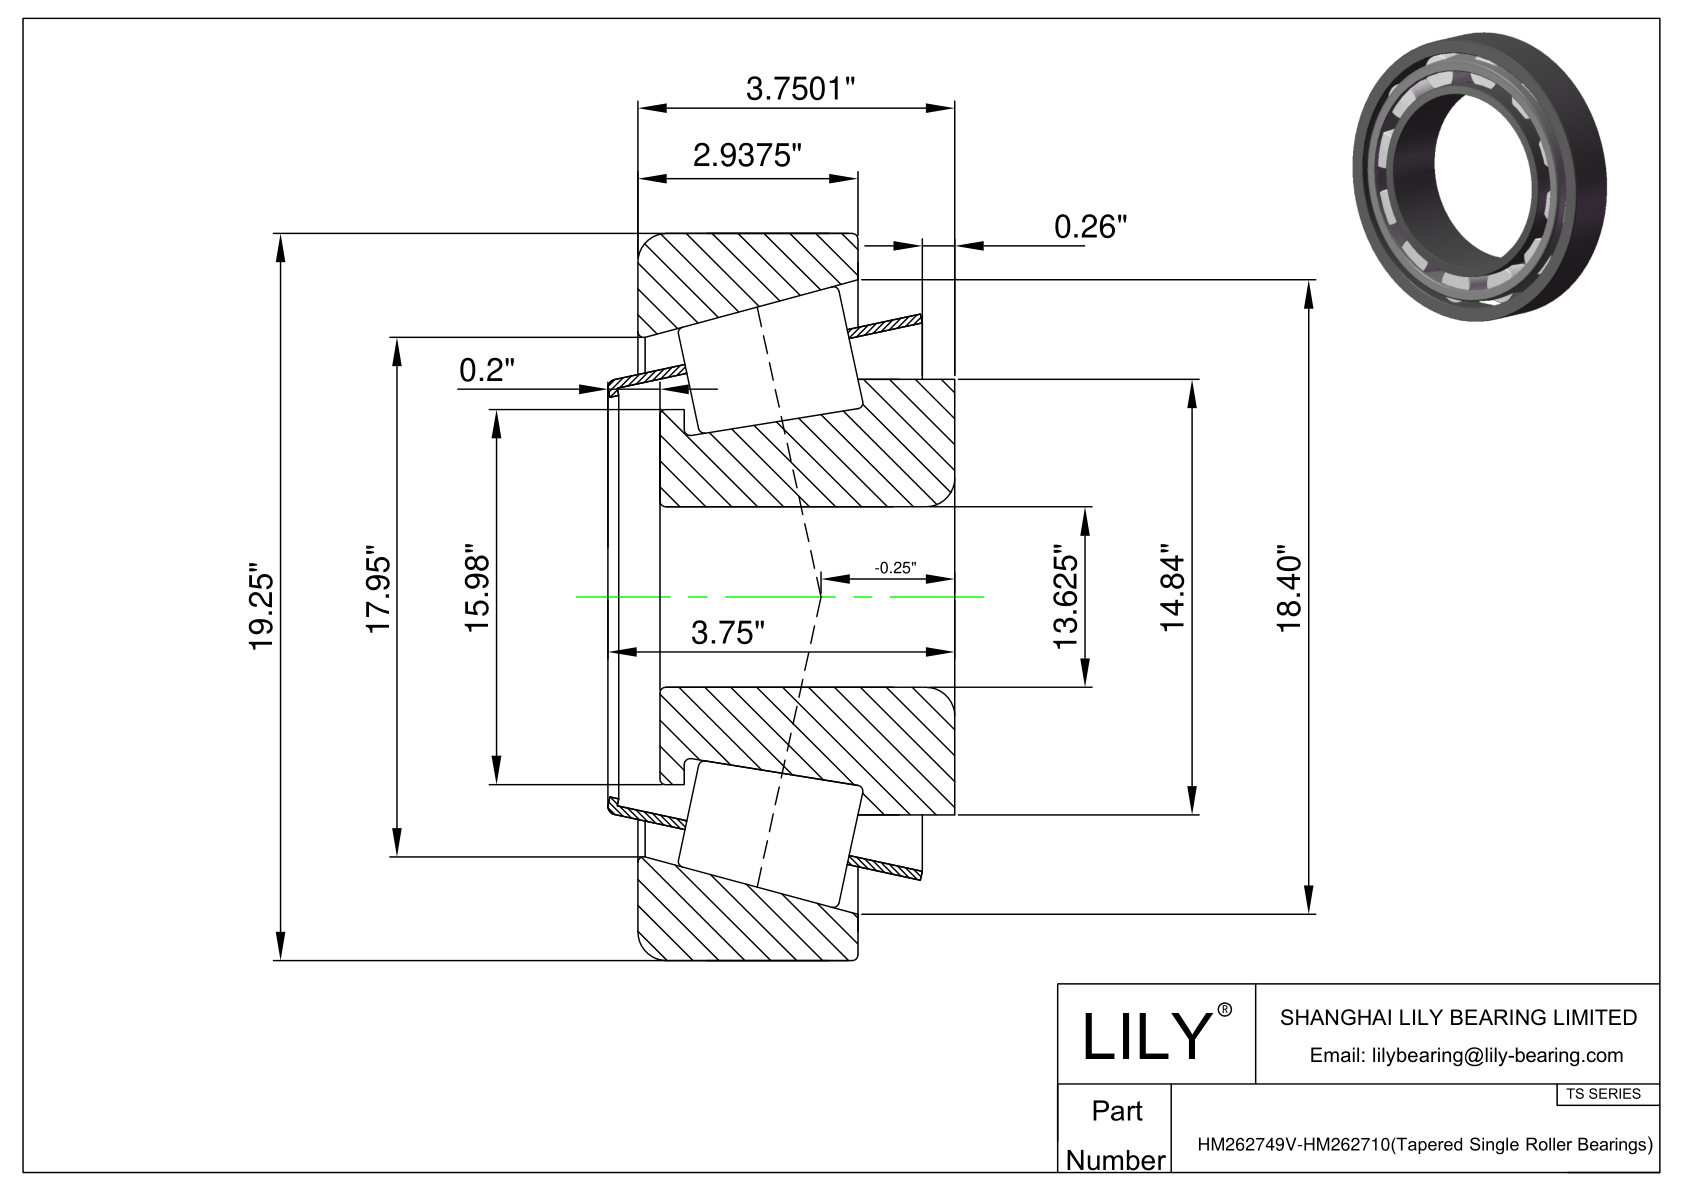 HM262749V-HM262710 TS (Tapered Single Roller Bearings) (Imperial) cad drawing